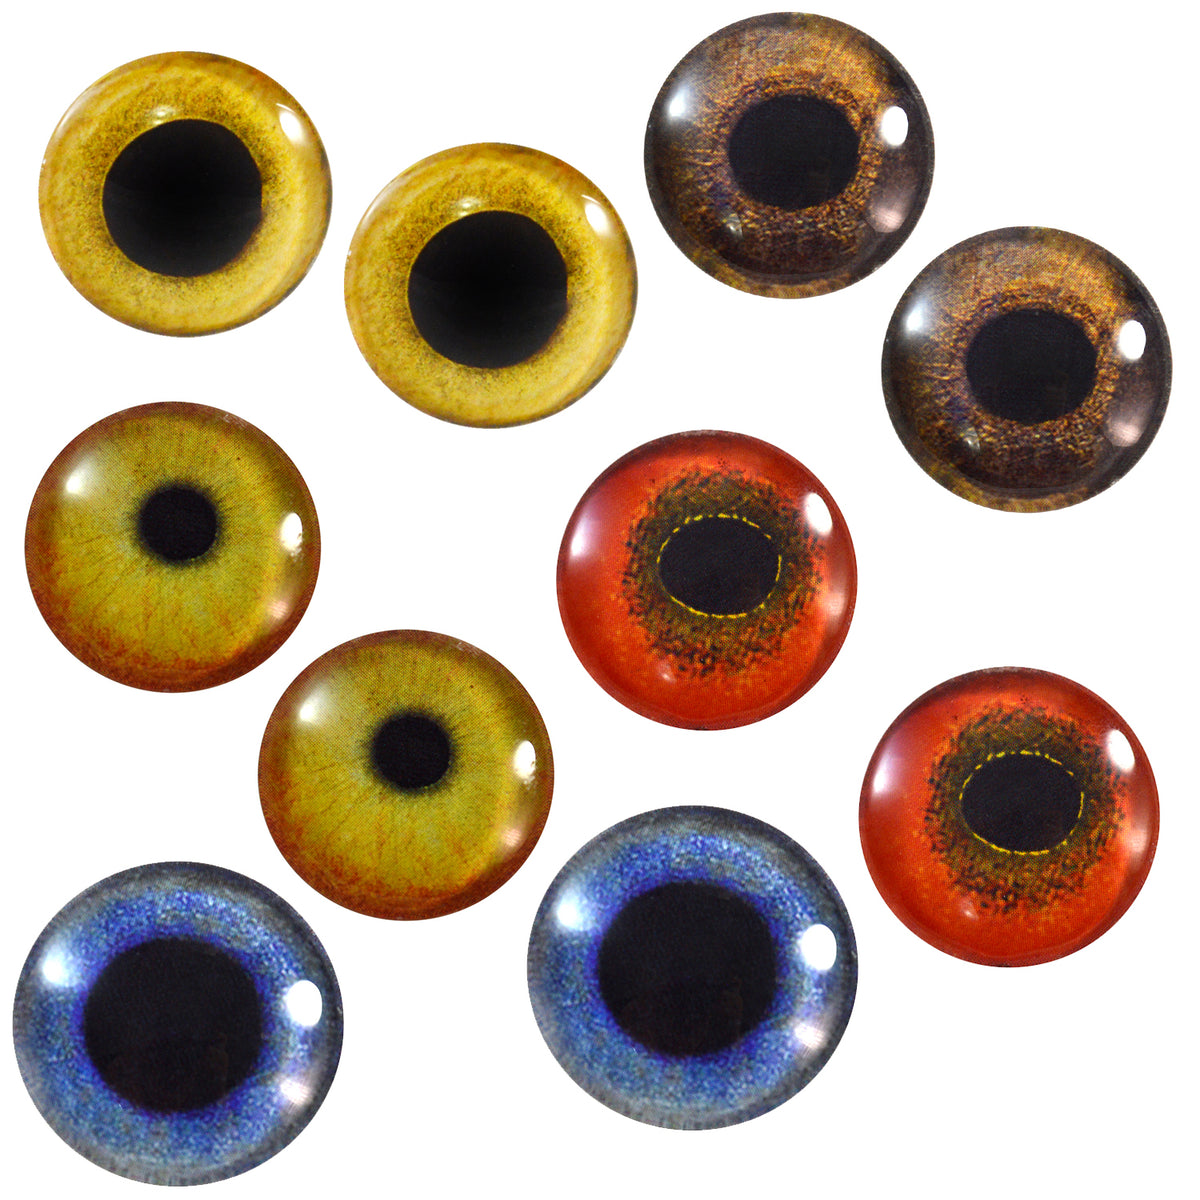 8mm Glass Fish Eyes Crafting Supply Flatback Cabochons for Doll Taxidermy or Jewelry Making 